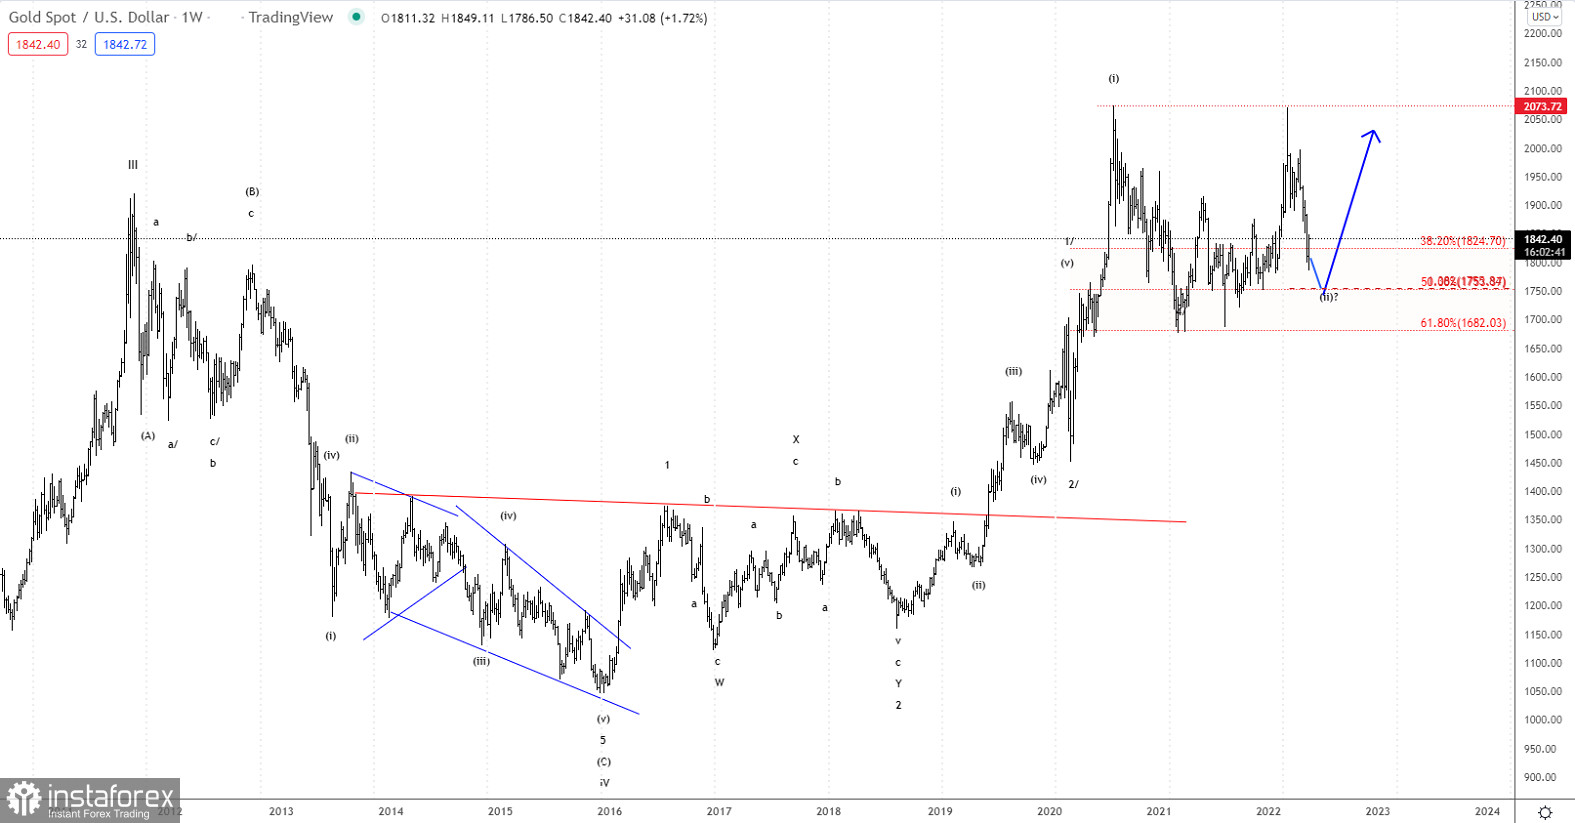 Elliott wave analysis of Gold for May 20, 2022